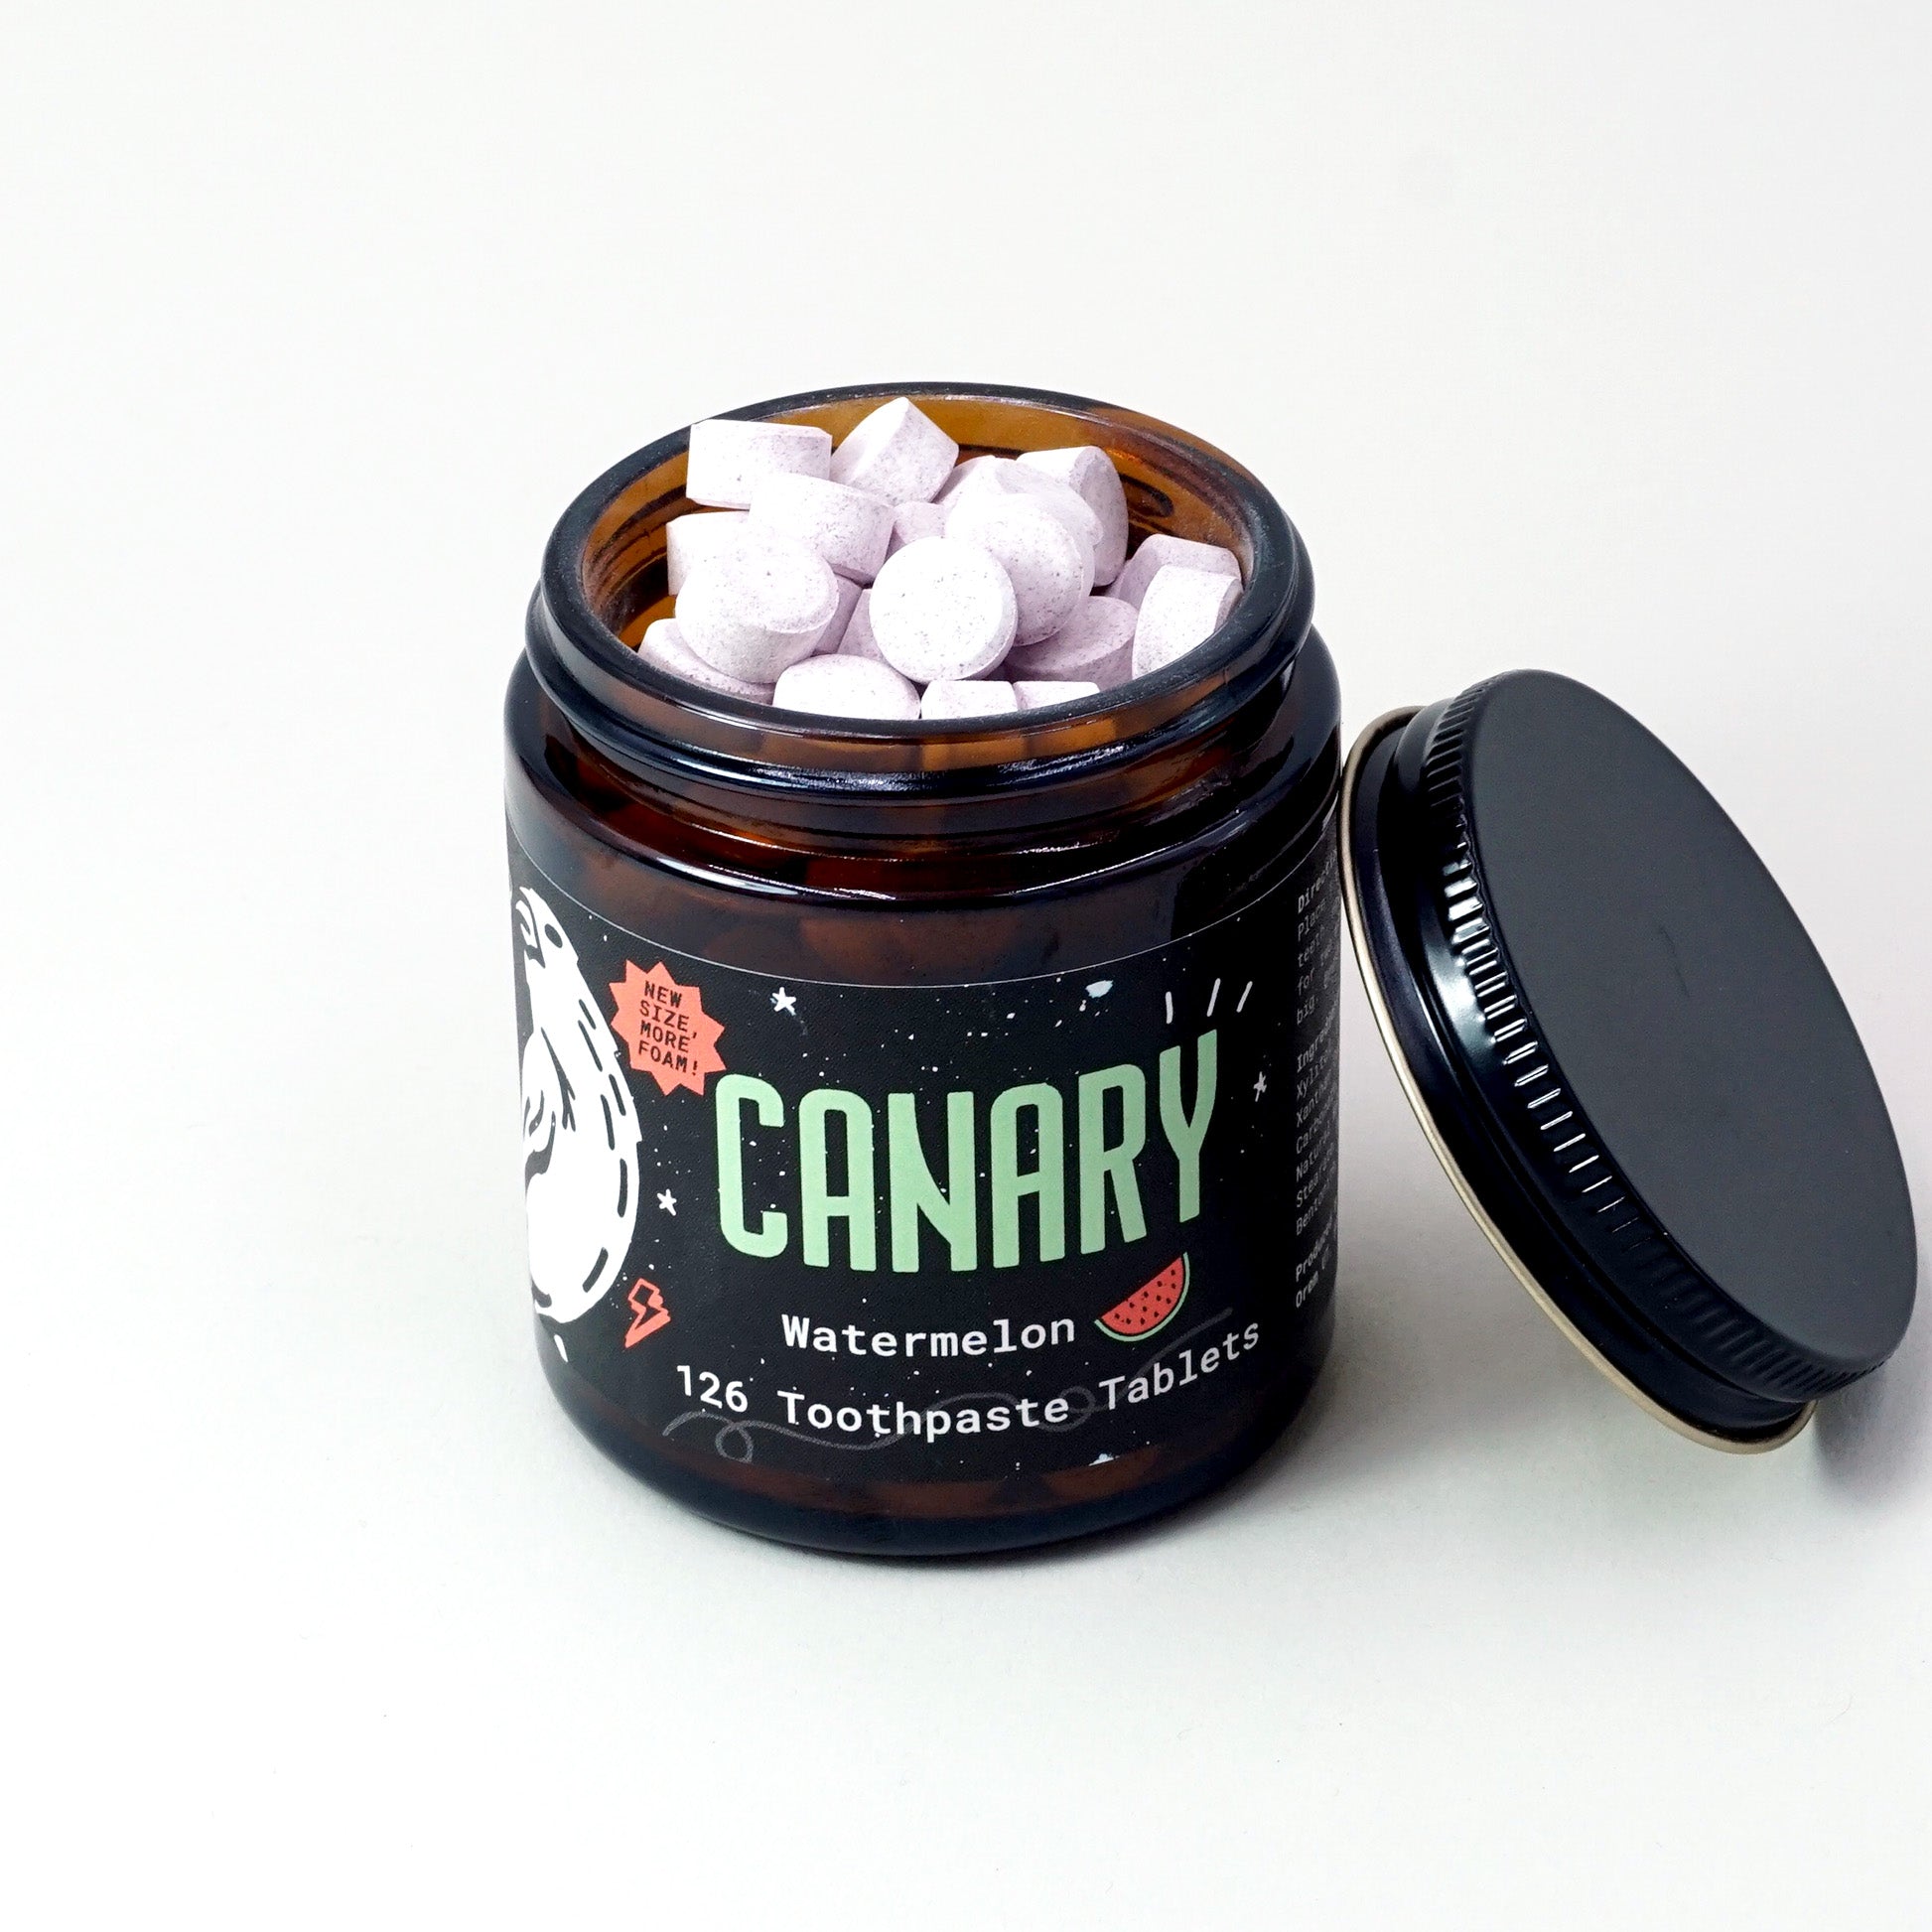 New and Improved Canary Watermelon Toothpaste Tablets, 126 count, two-month supply jar , view of tablets in the opened jar.